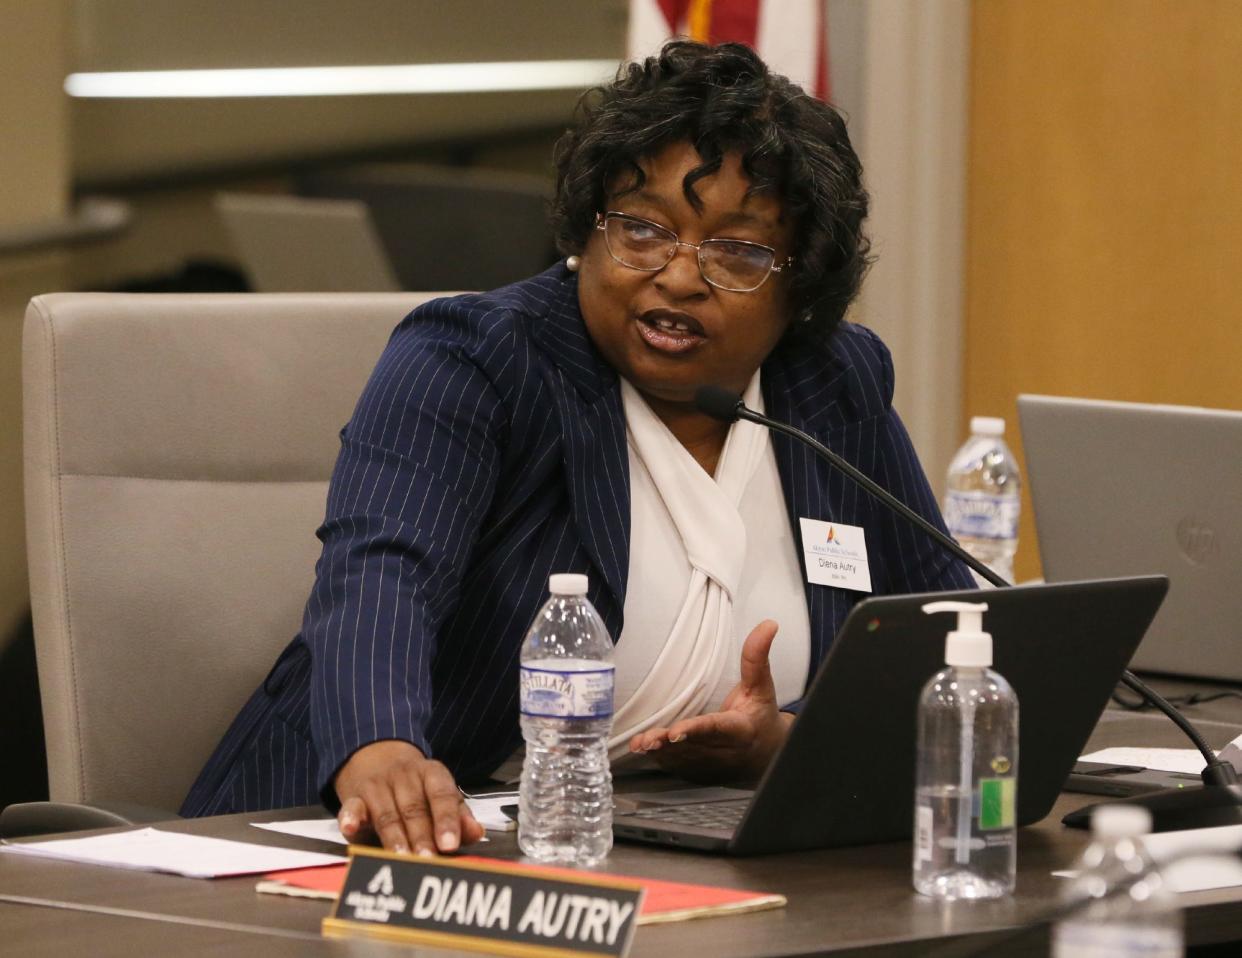 Diana Autry Monday night was elected the new president of the Akron Public Schools Board of Education. Autry, a registered nurse, is seen here during her previous tenure as board vice president.